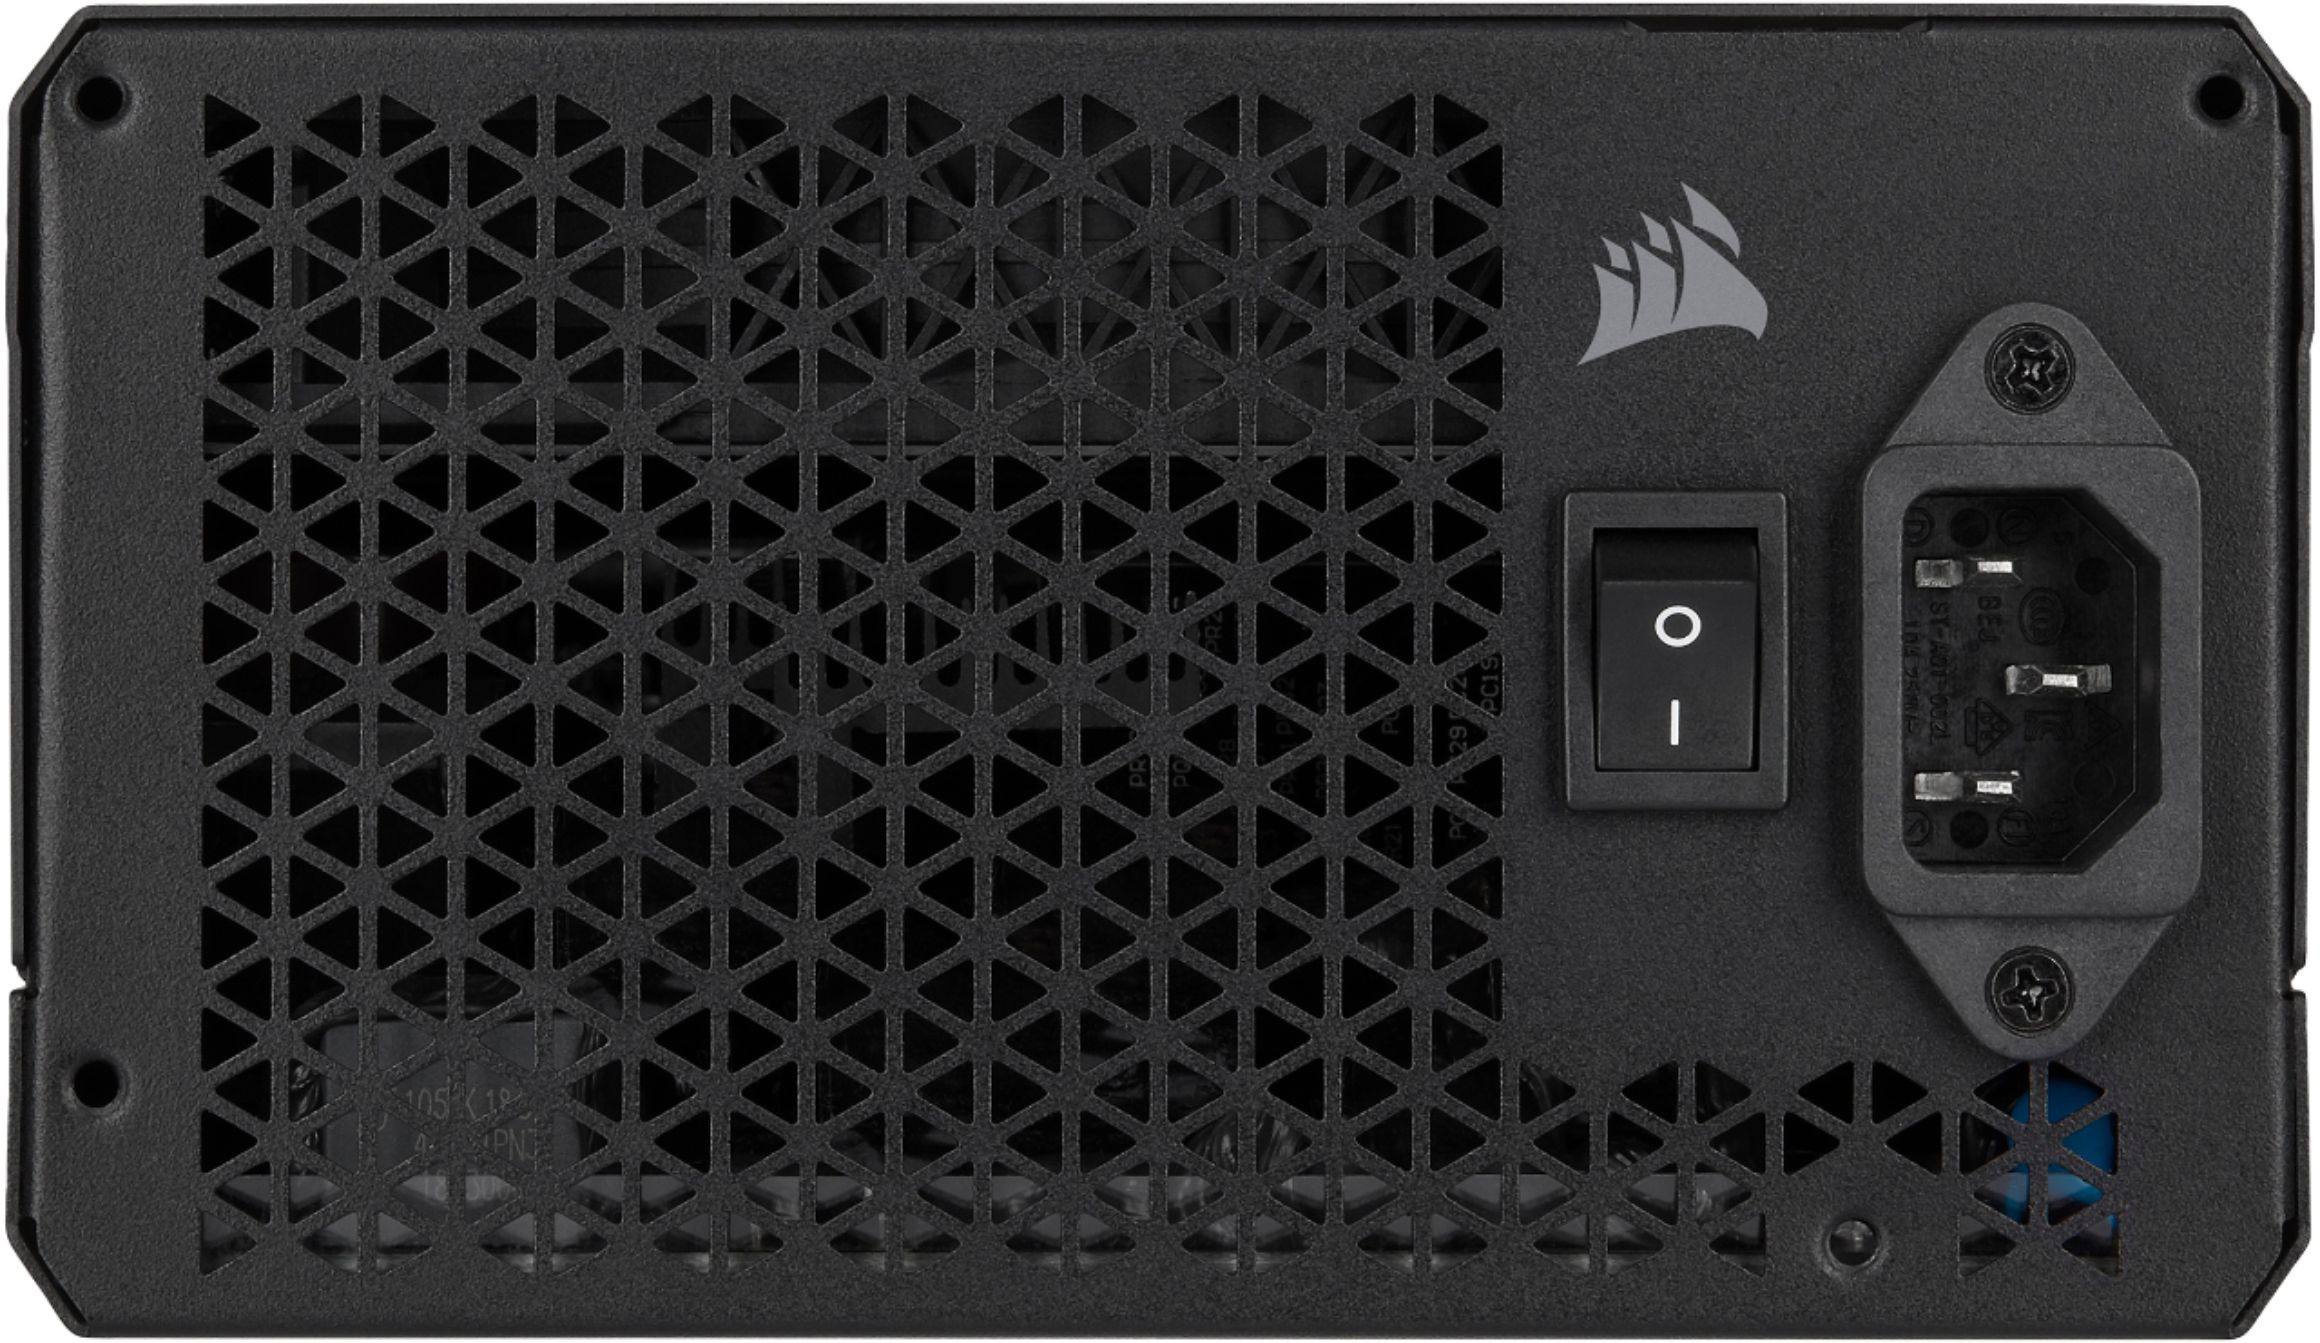 CORSAIR RMx Shift Series RM850x 80 Plus Gold Fully Modular ATX Power Supply  with Modular Side Interface Black CP-9020252-NA - Best Buy